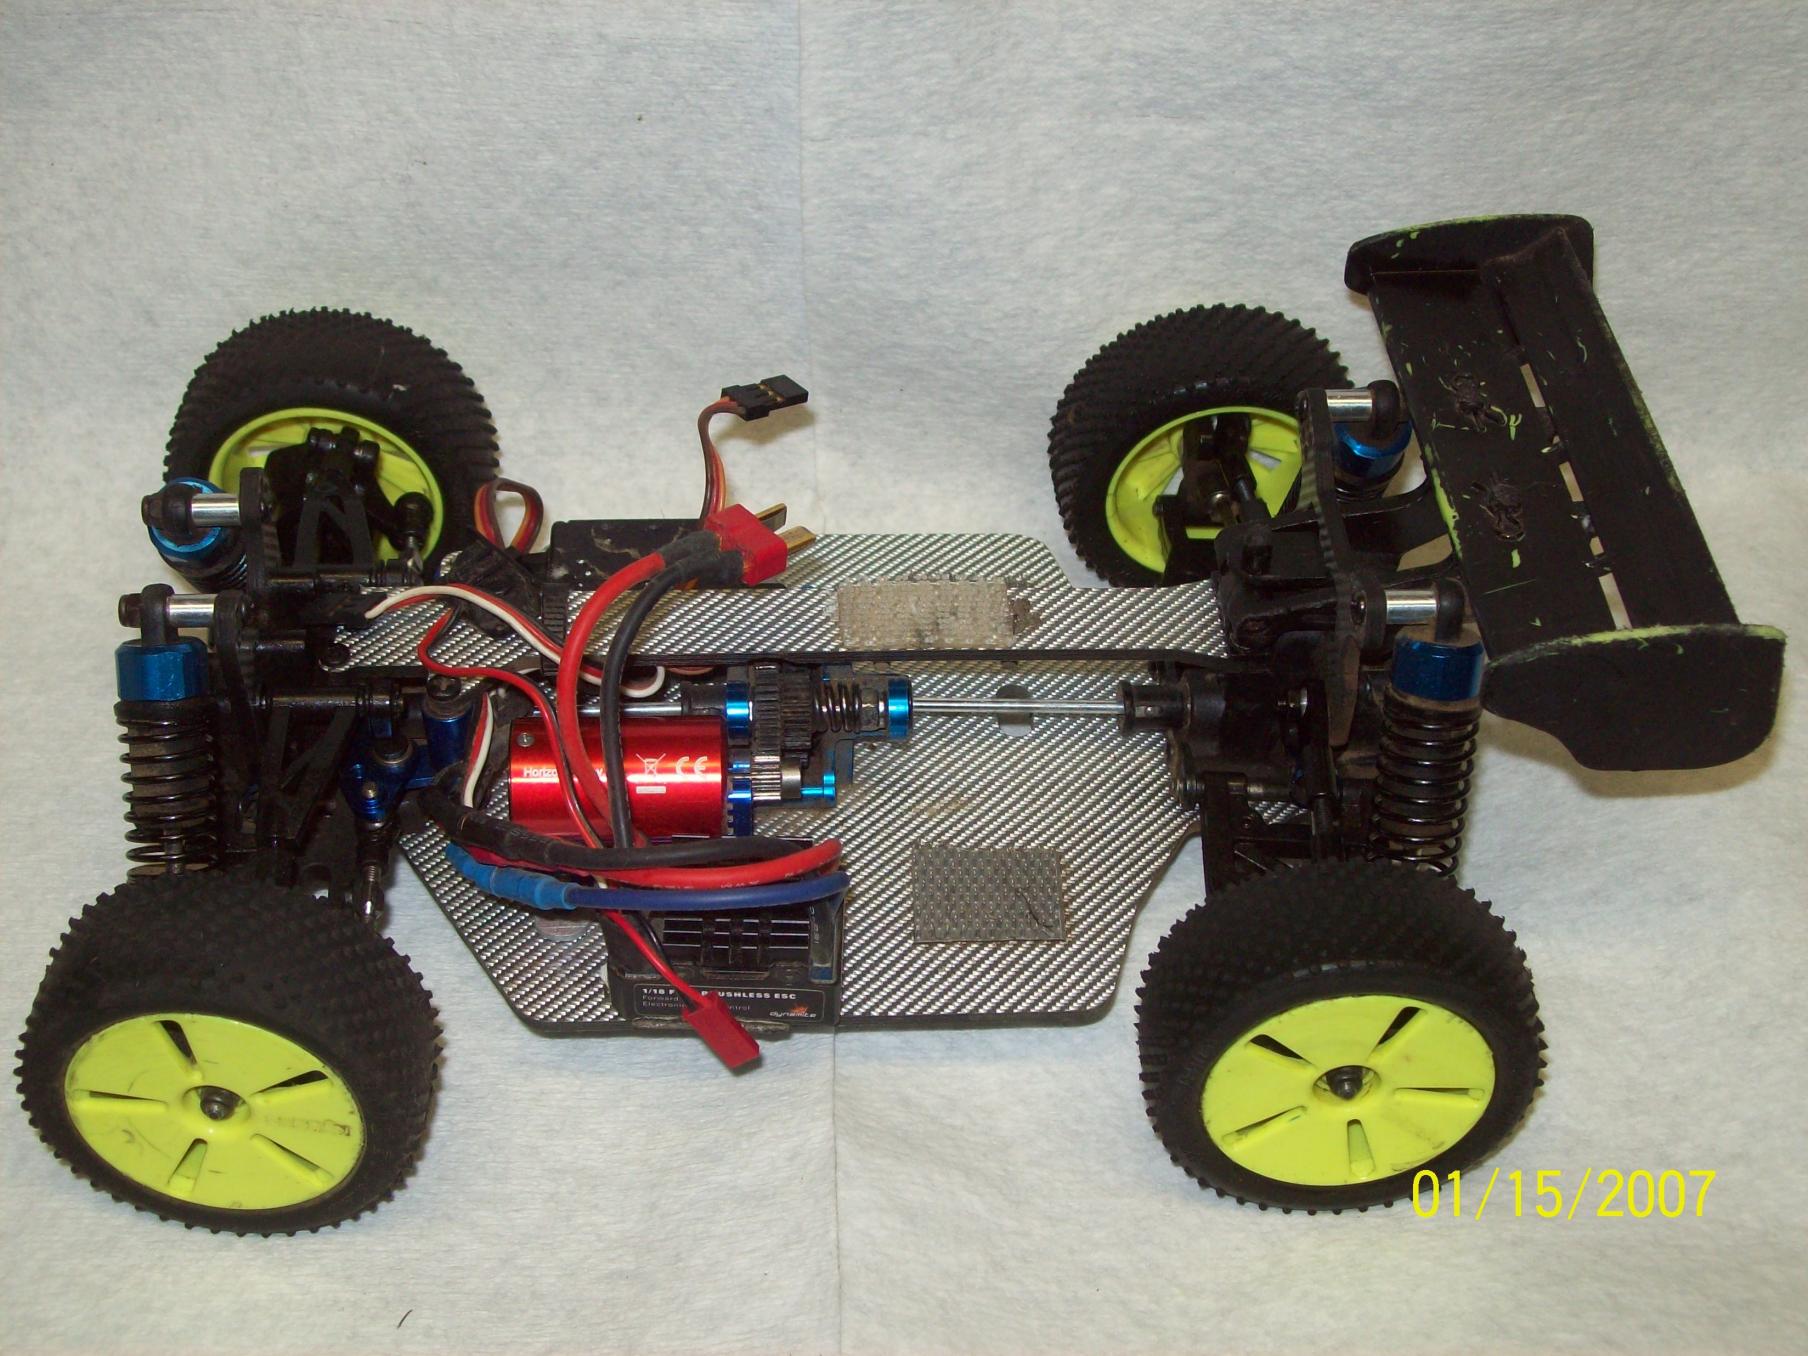 Kyosho Mini Inferno brushless - R/C Tech Forums